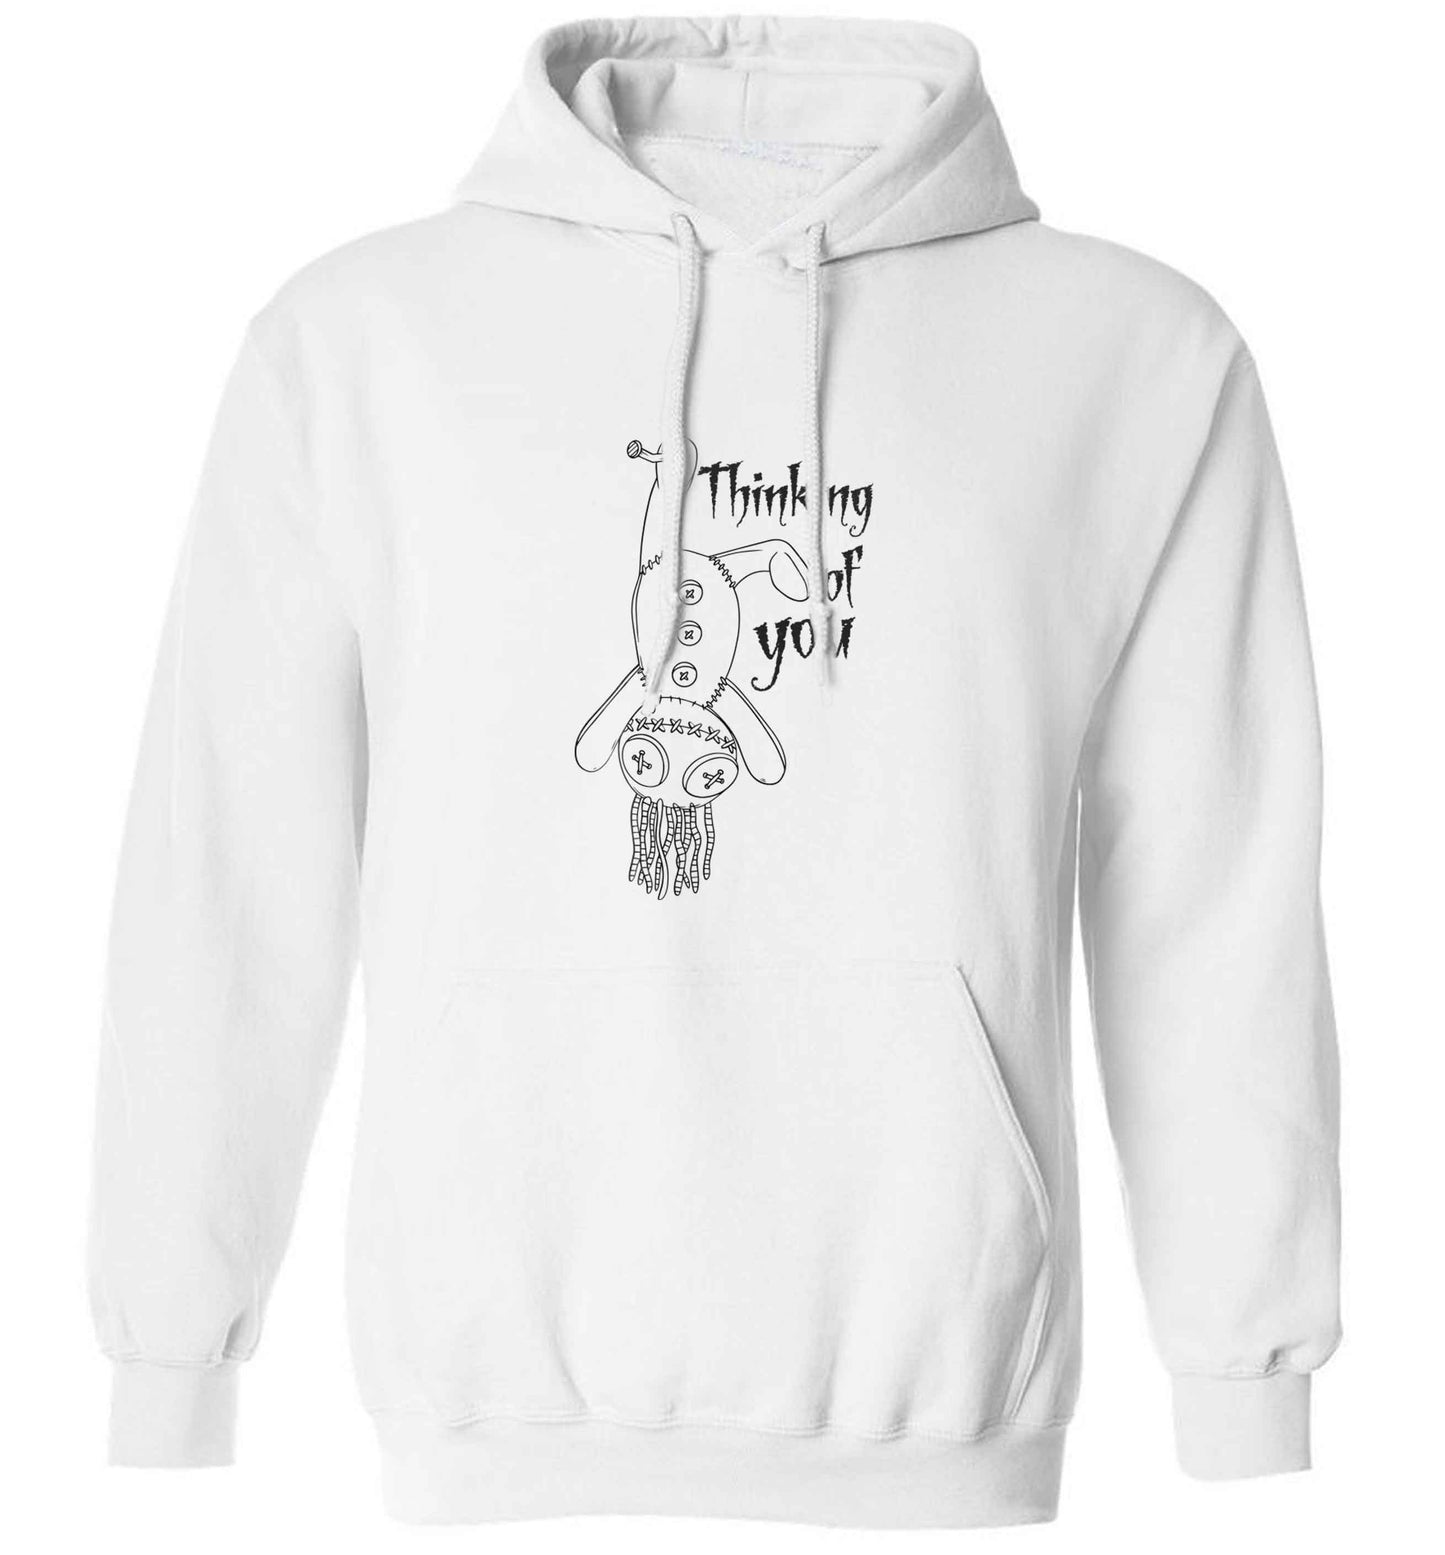 Thinking of you adults unisex white hoodie 2XL